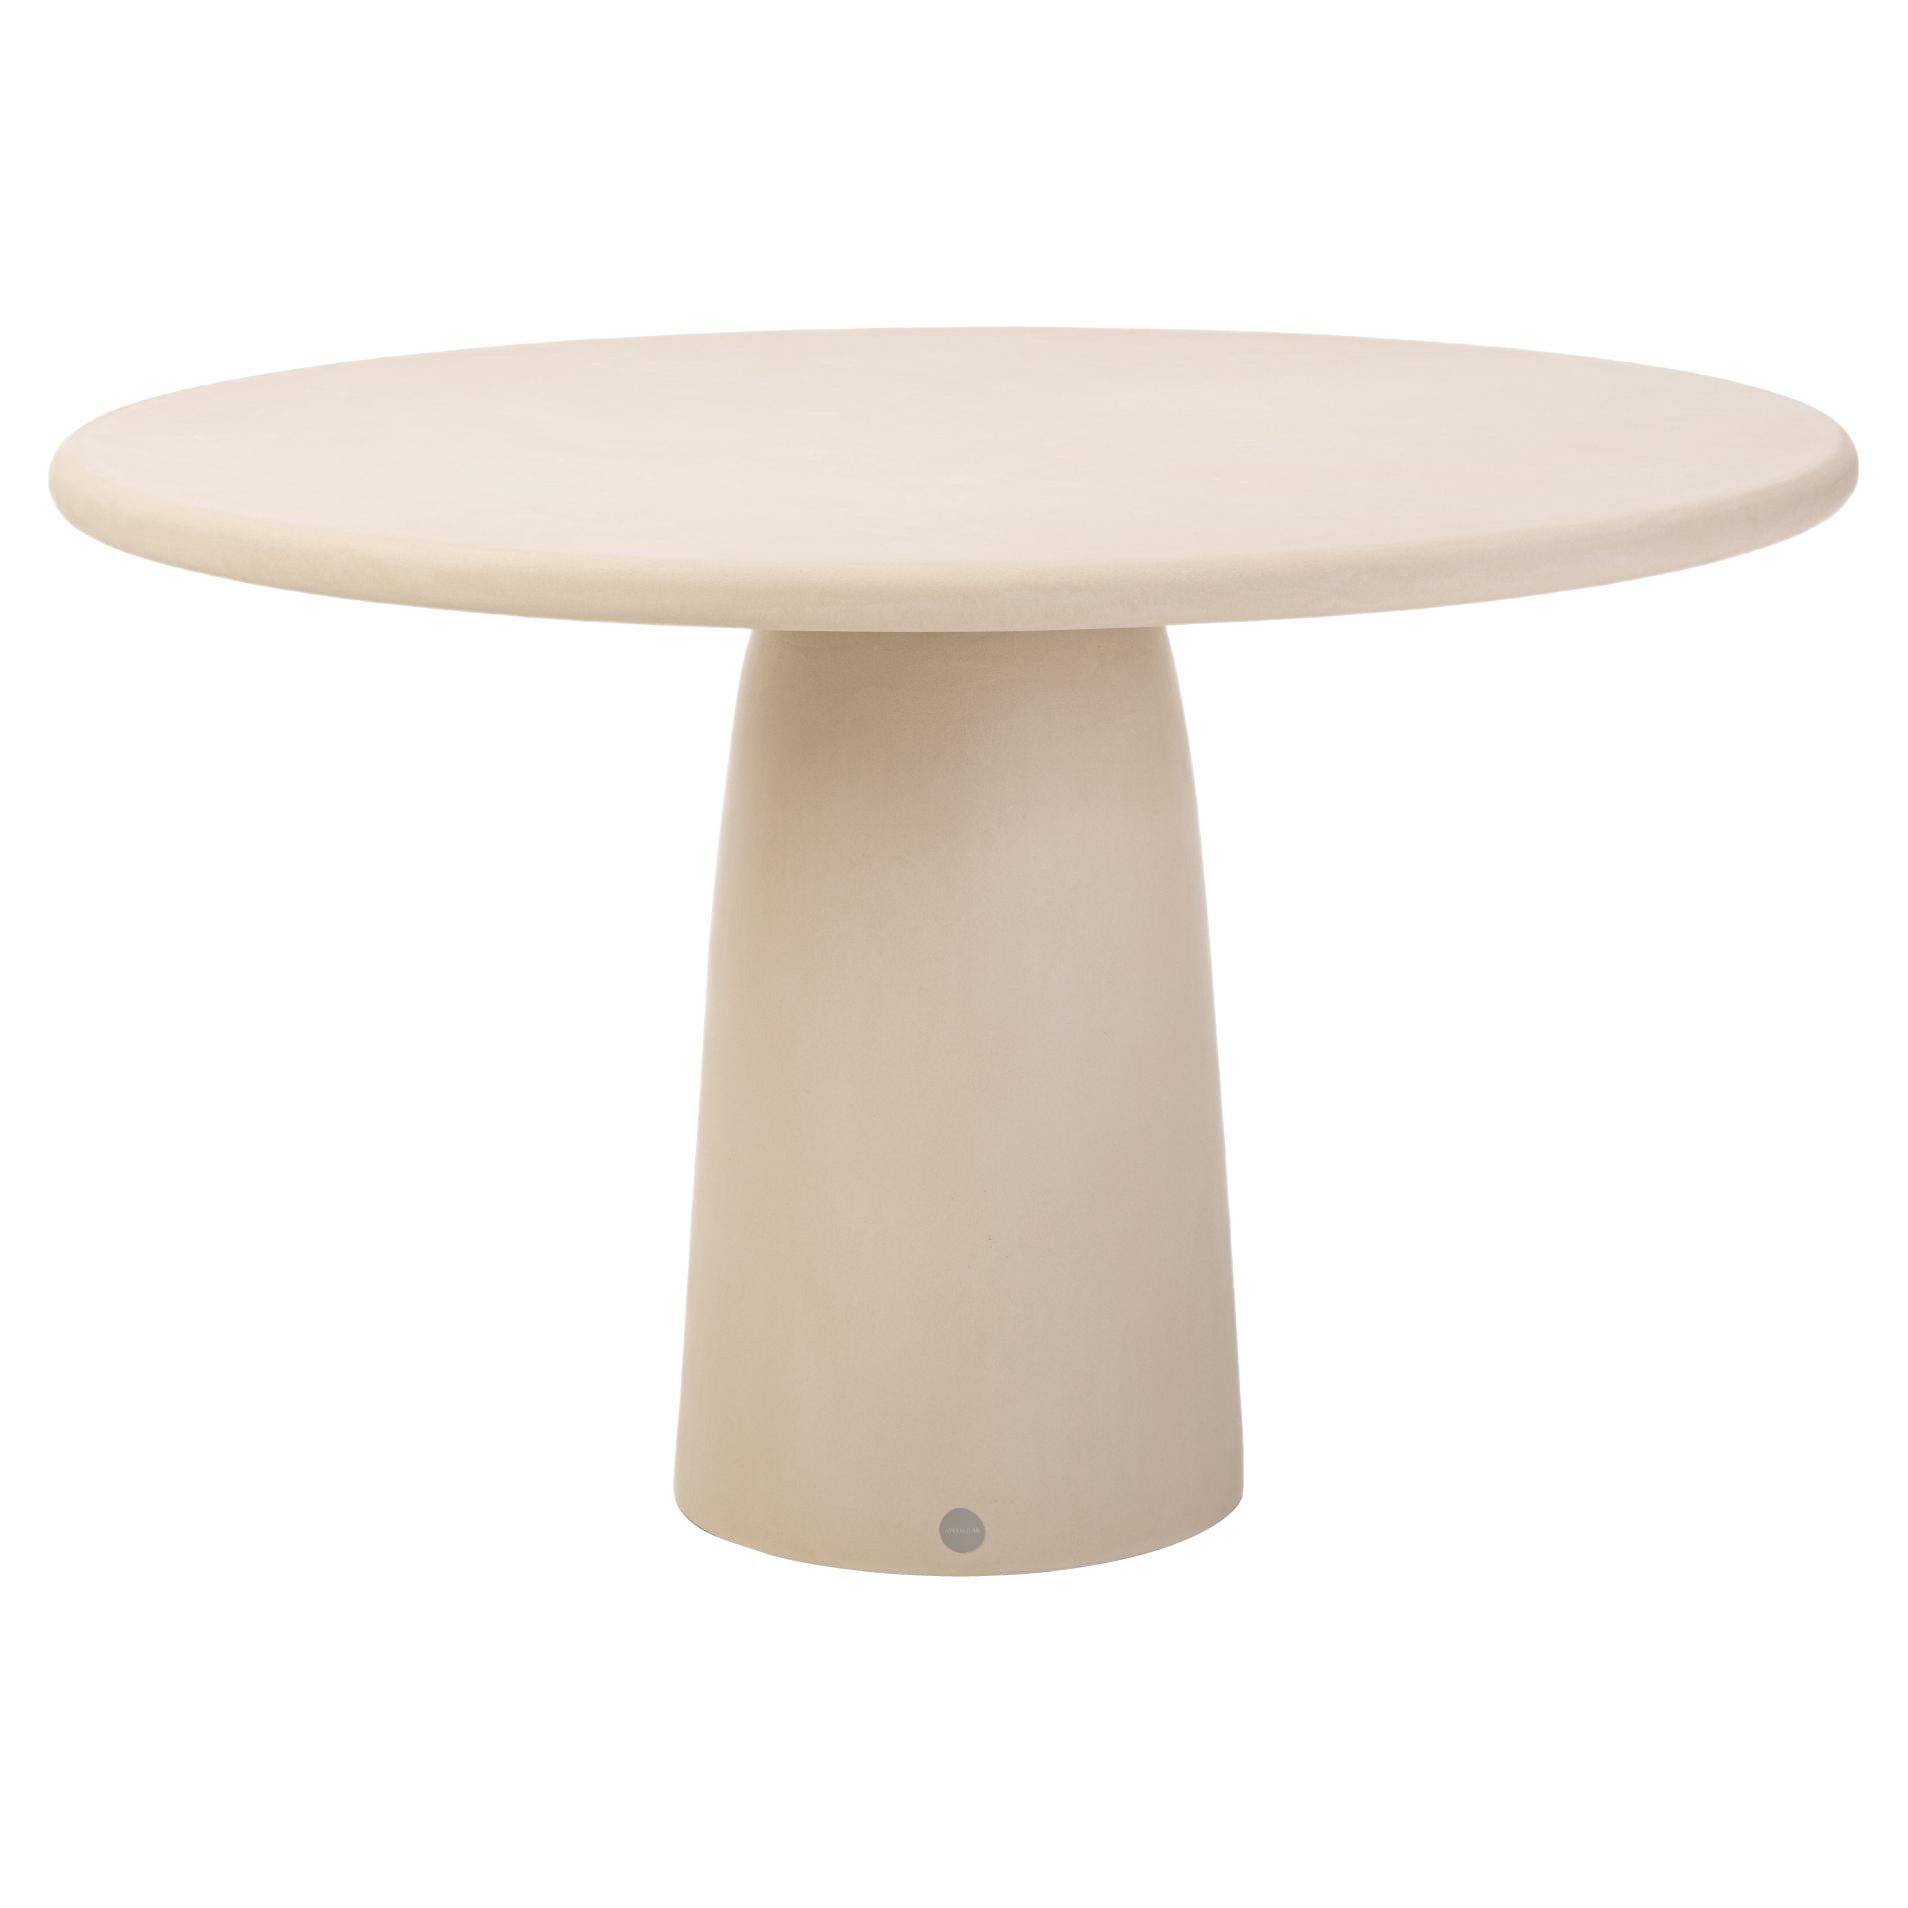 Round Natural Plaster Dining Table "Menhir" 160 by Isabelle Beaumont